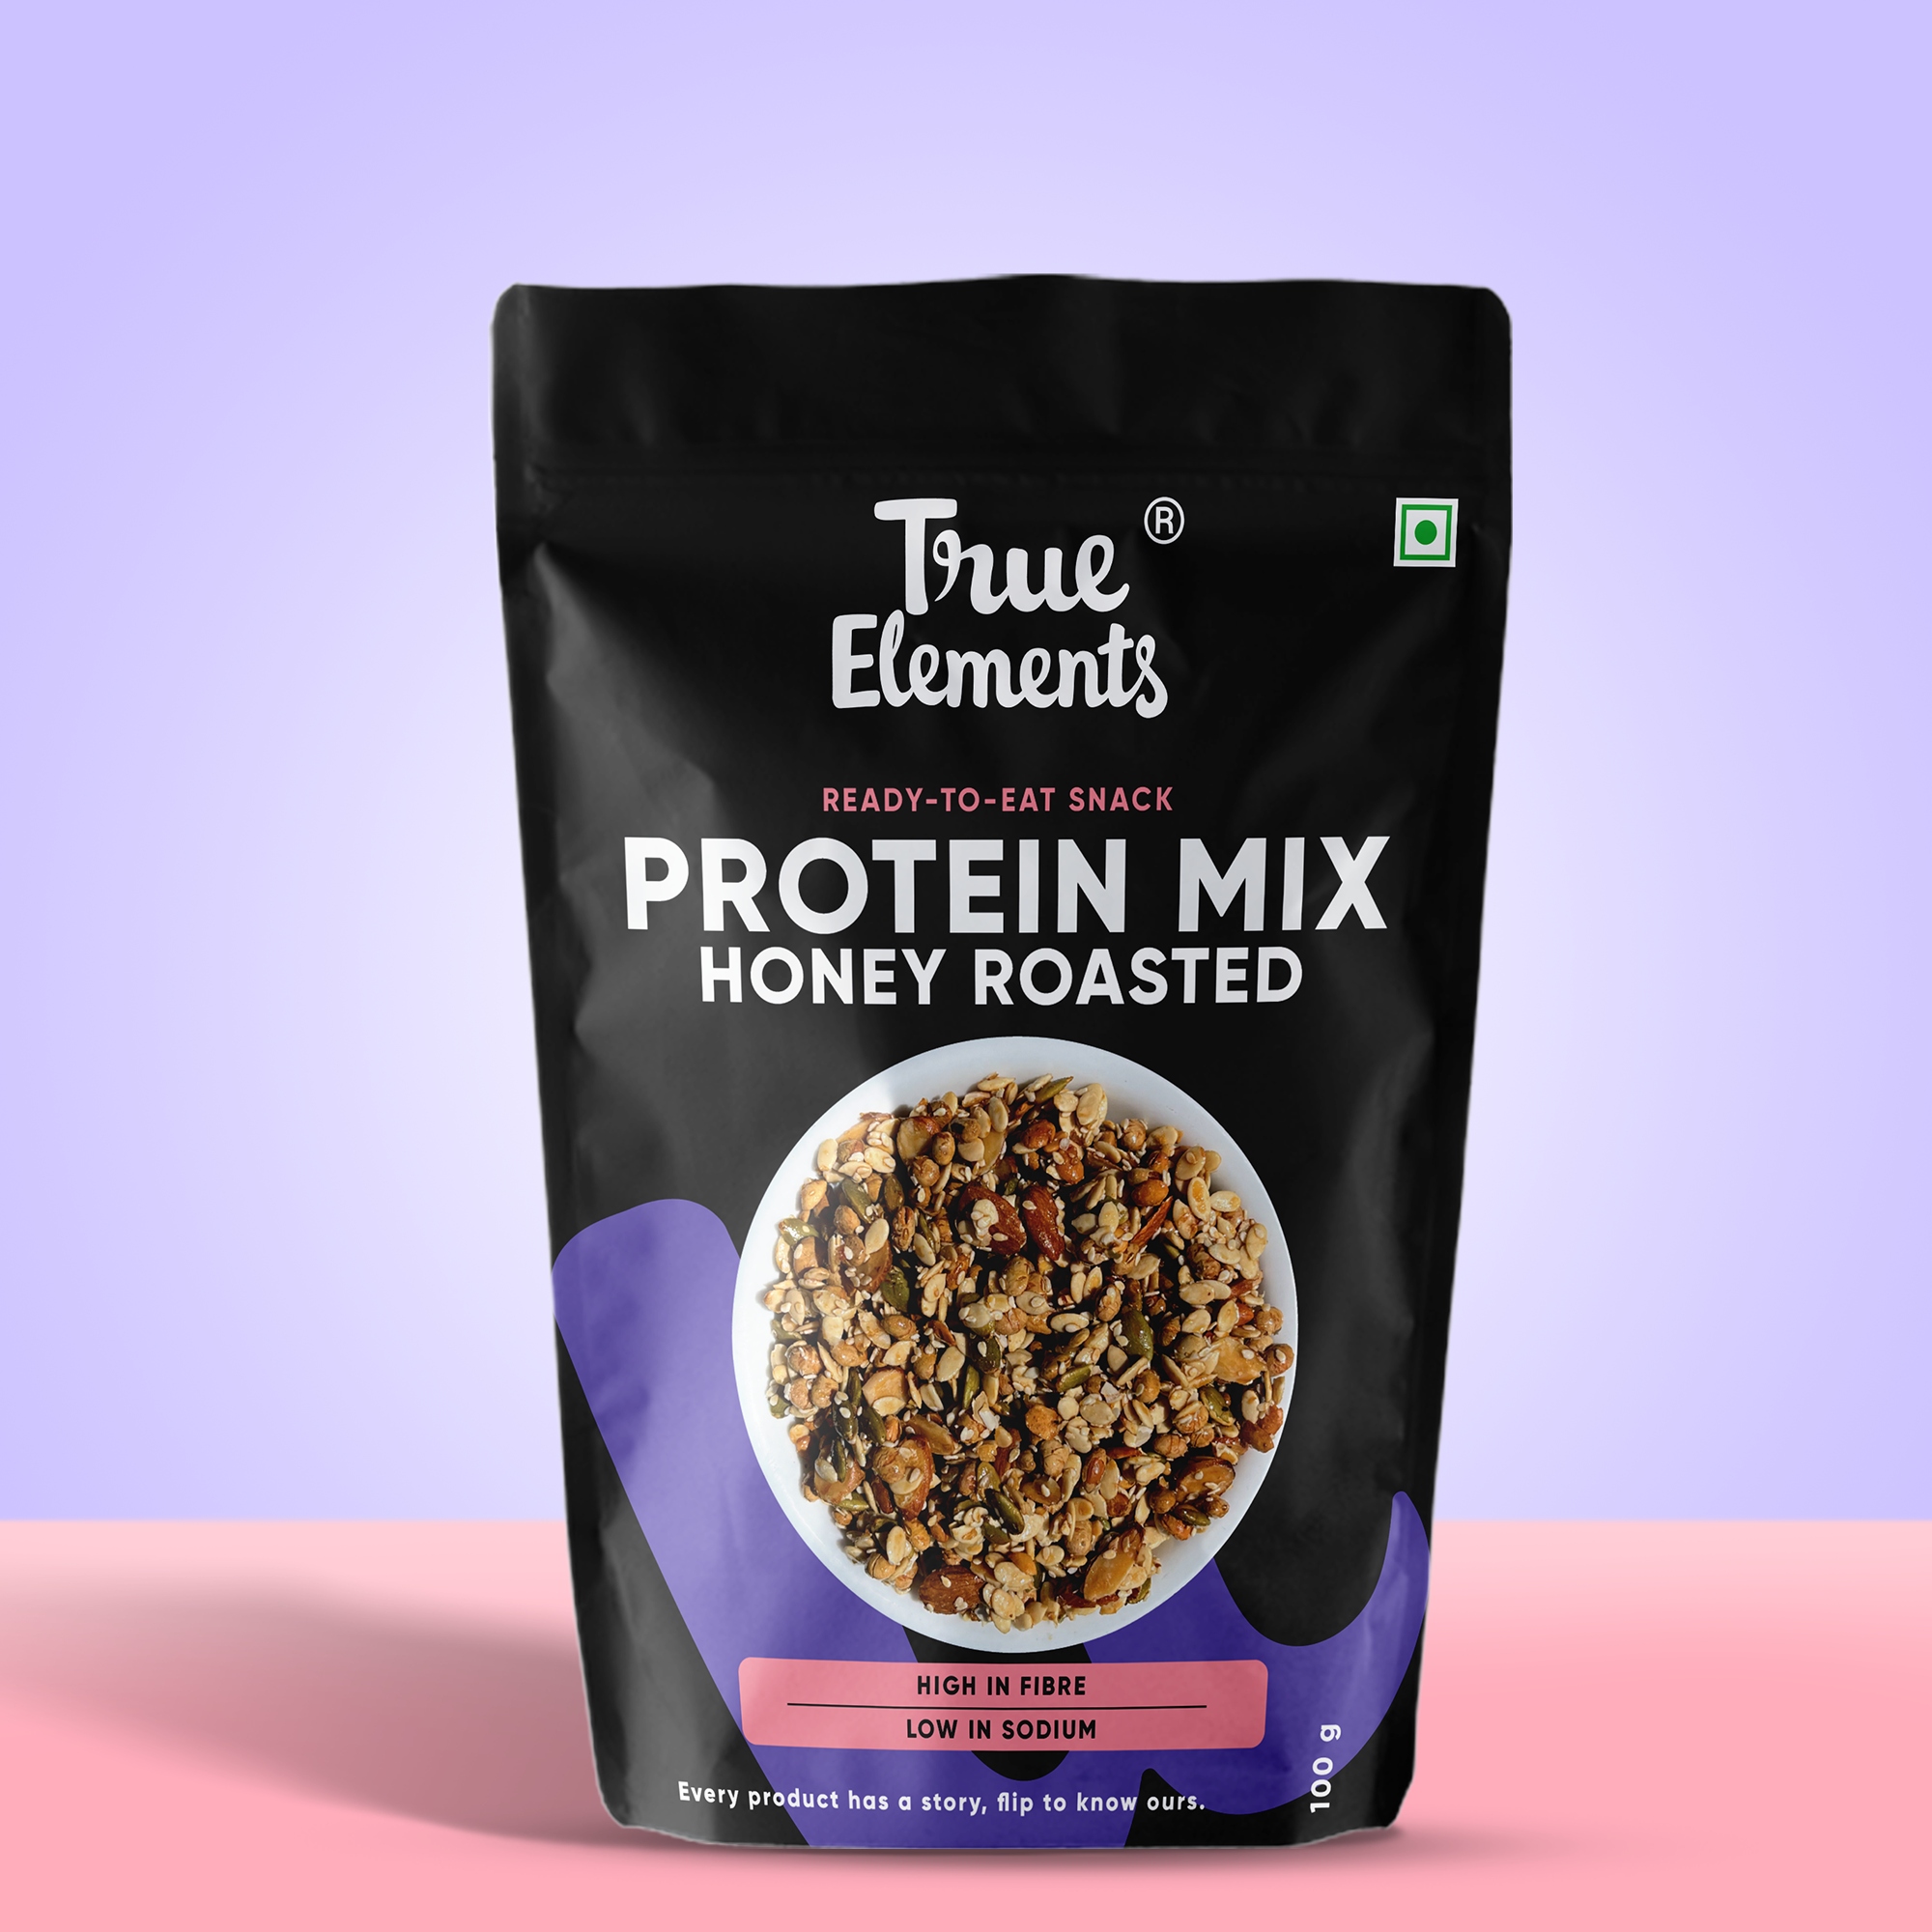 True Elements Protein Mix Honey Roasted